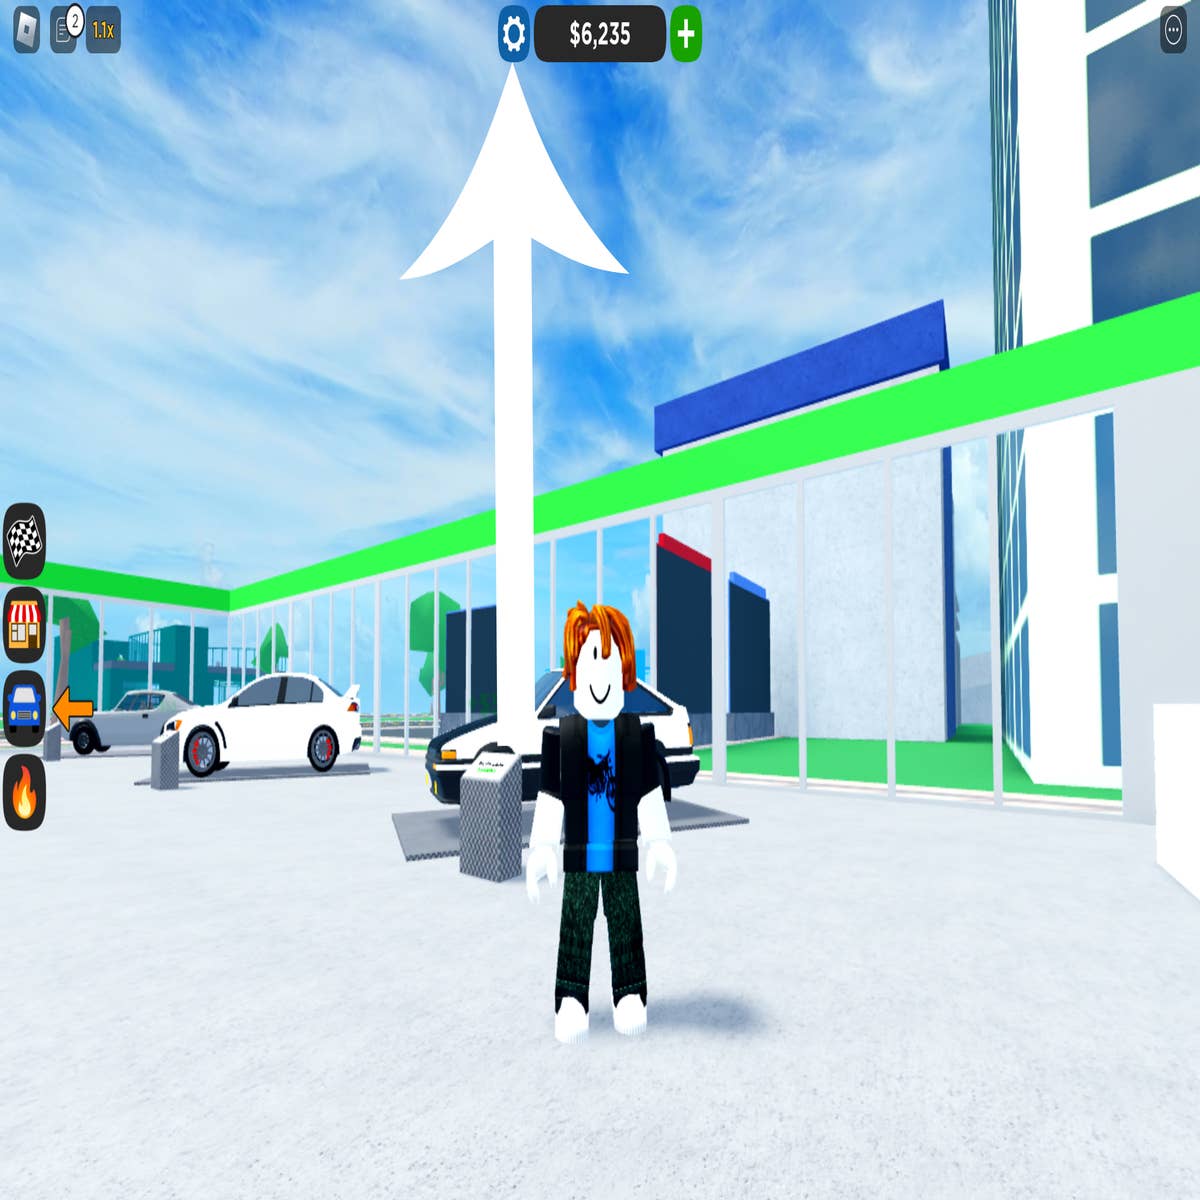 Car Dealership Tycoon Codes (December 2023) - Pro Game Guides